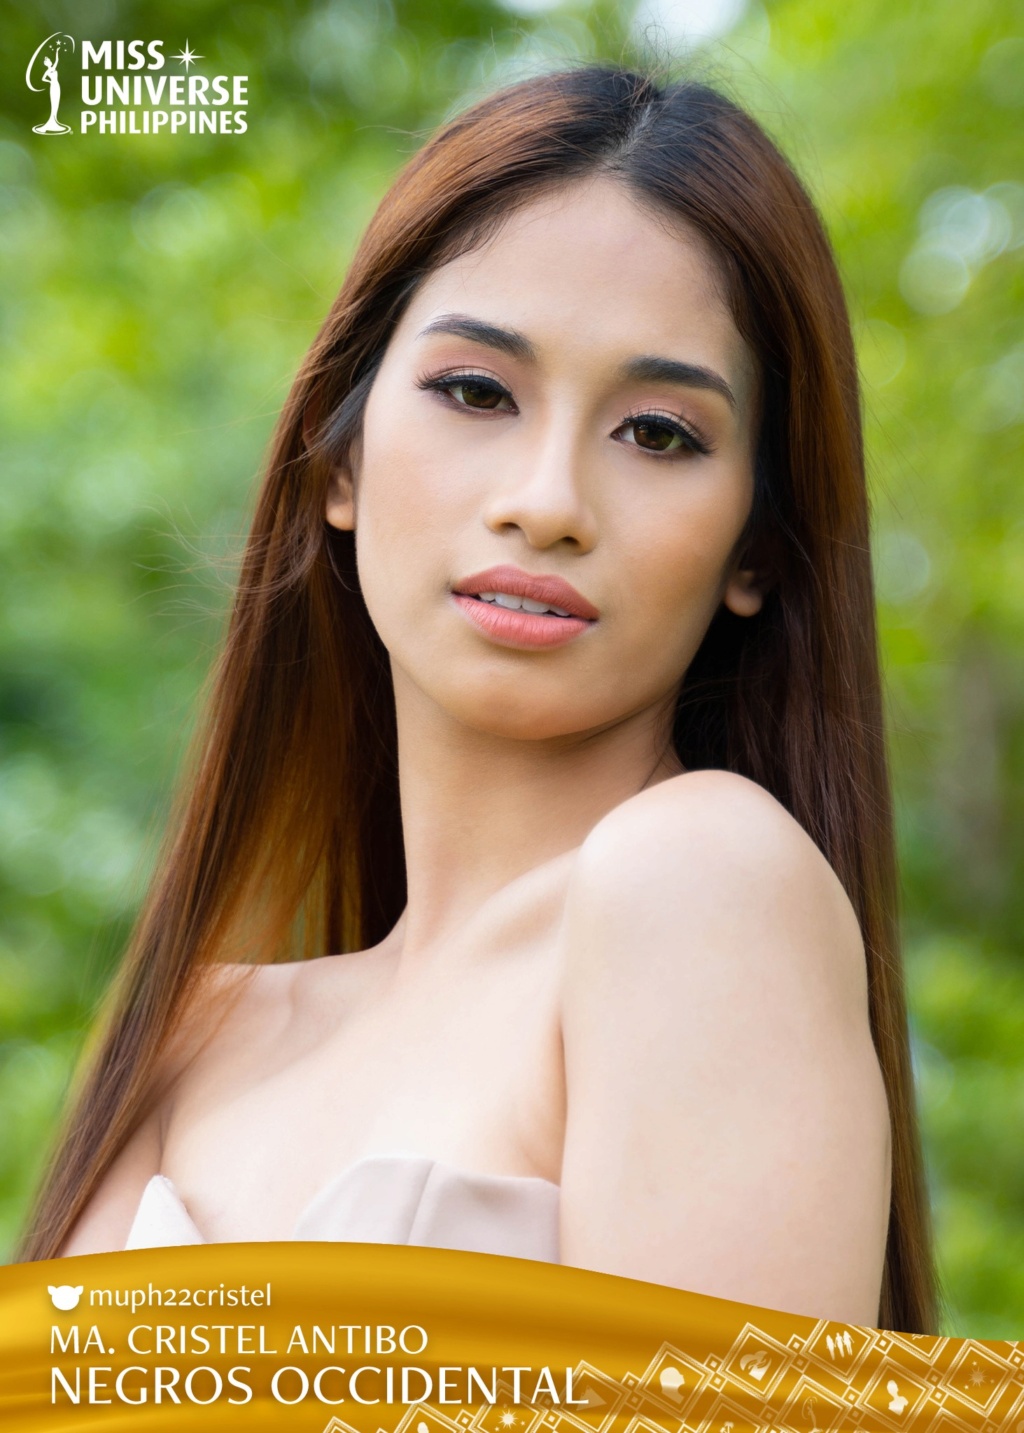 ROAD TO MISS UNIVERSE PHILIPPINES 2022 is is Miss Pasay, Celeste Cortesi - Page 5 27573610